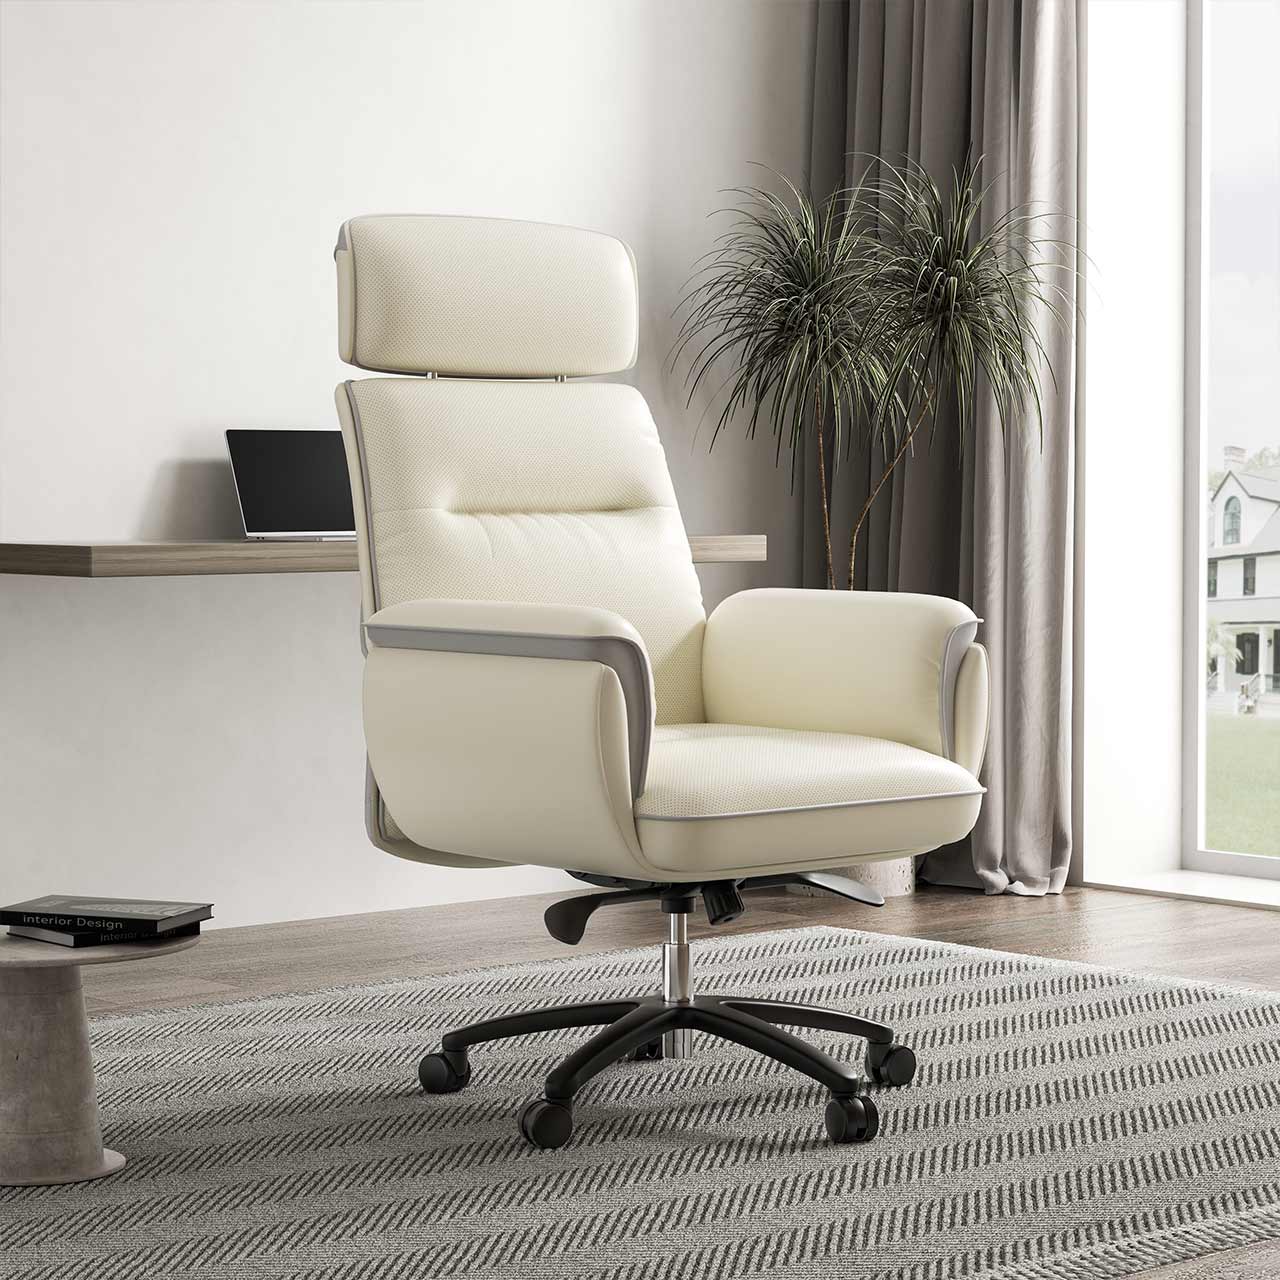 Royal, Executive Office Chair,Beige White